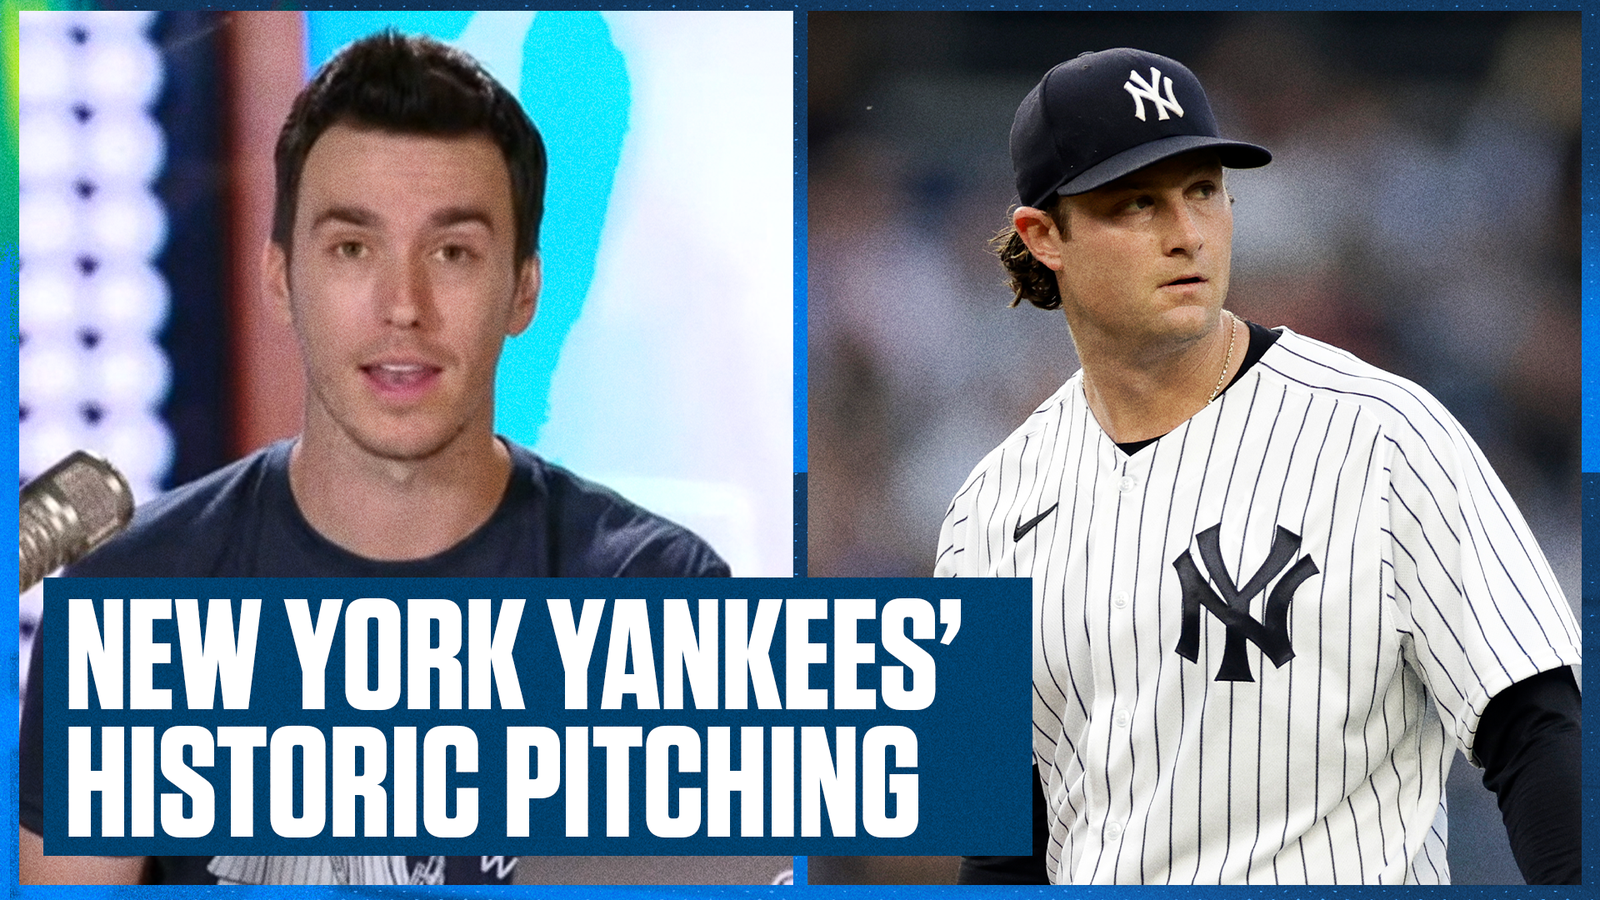 New York Yankees' meteoric rise behind historic pitching